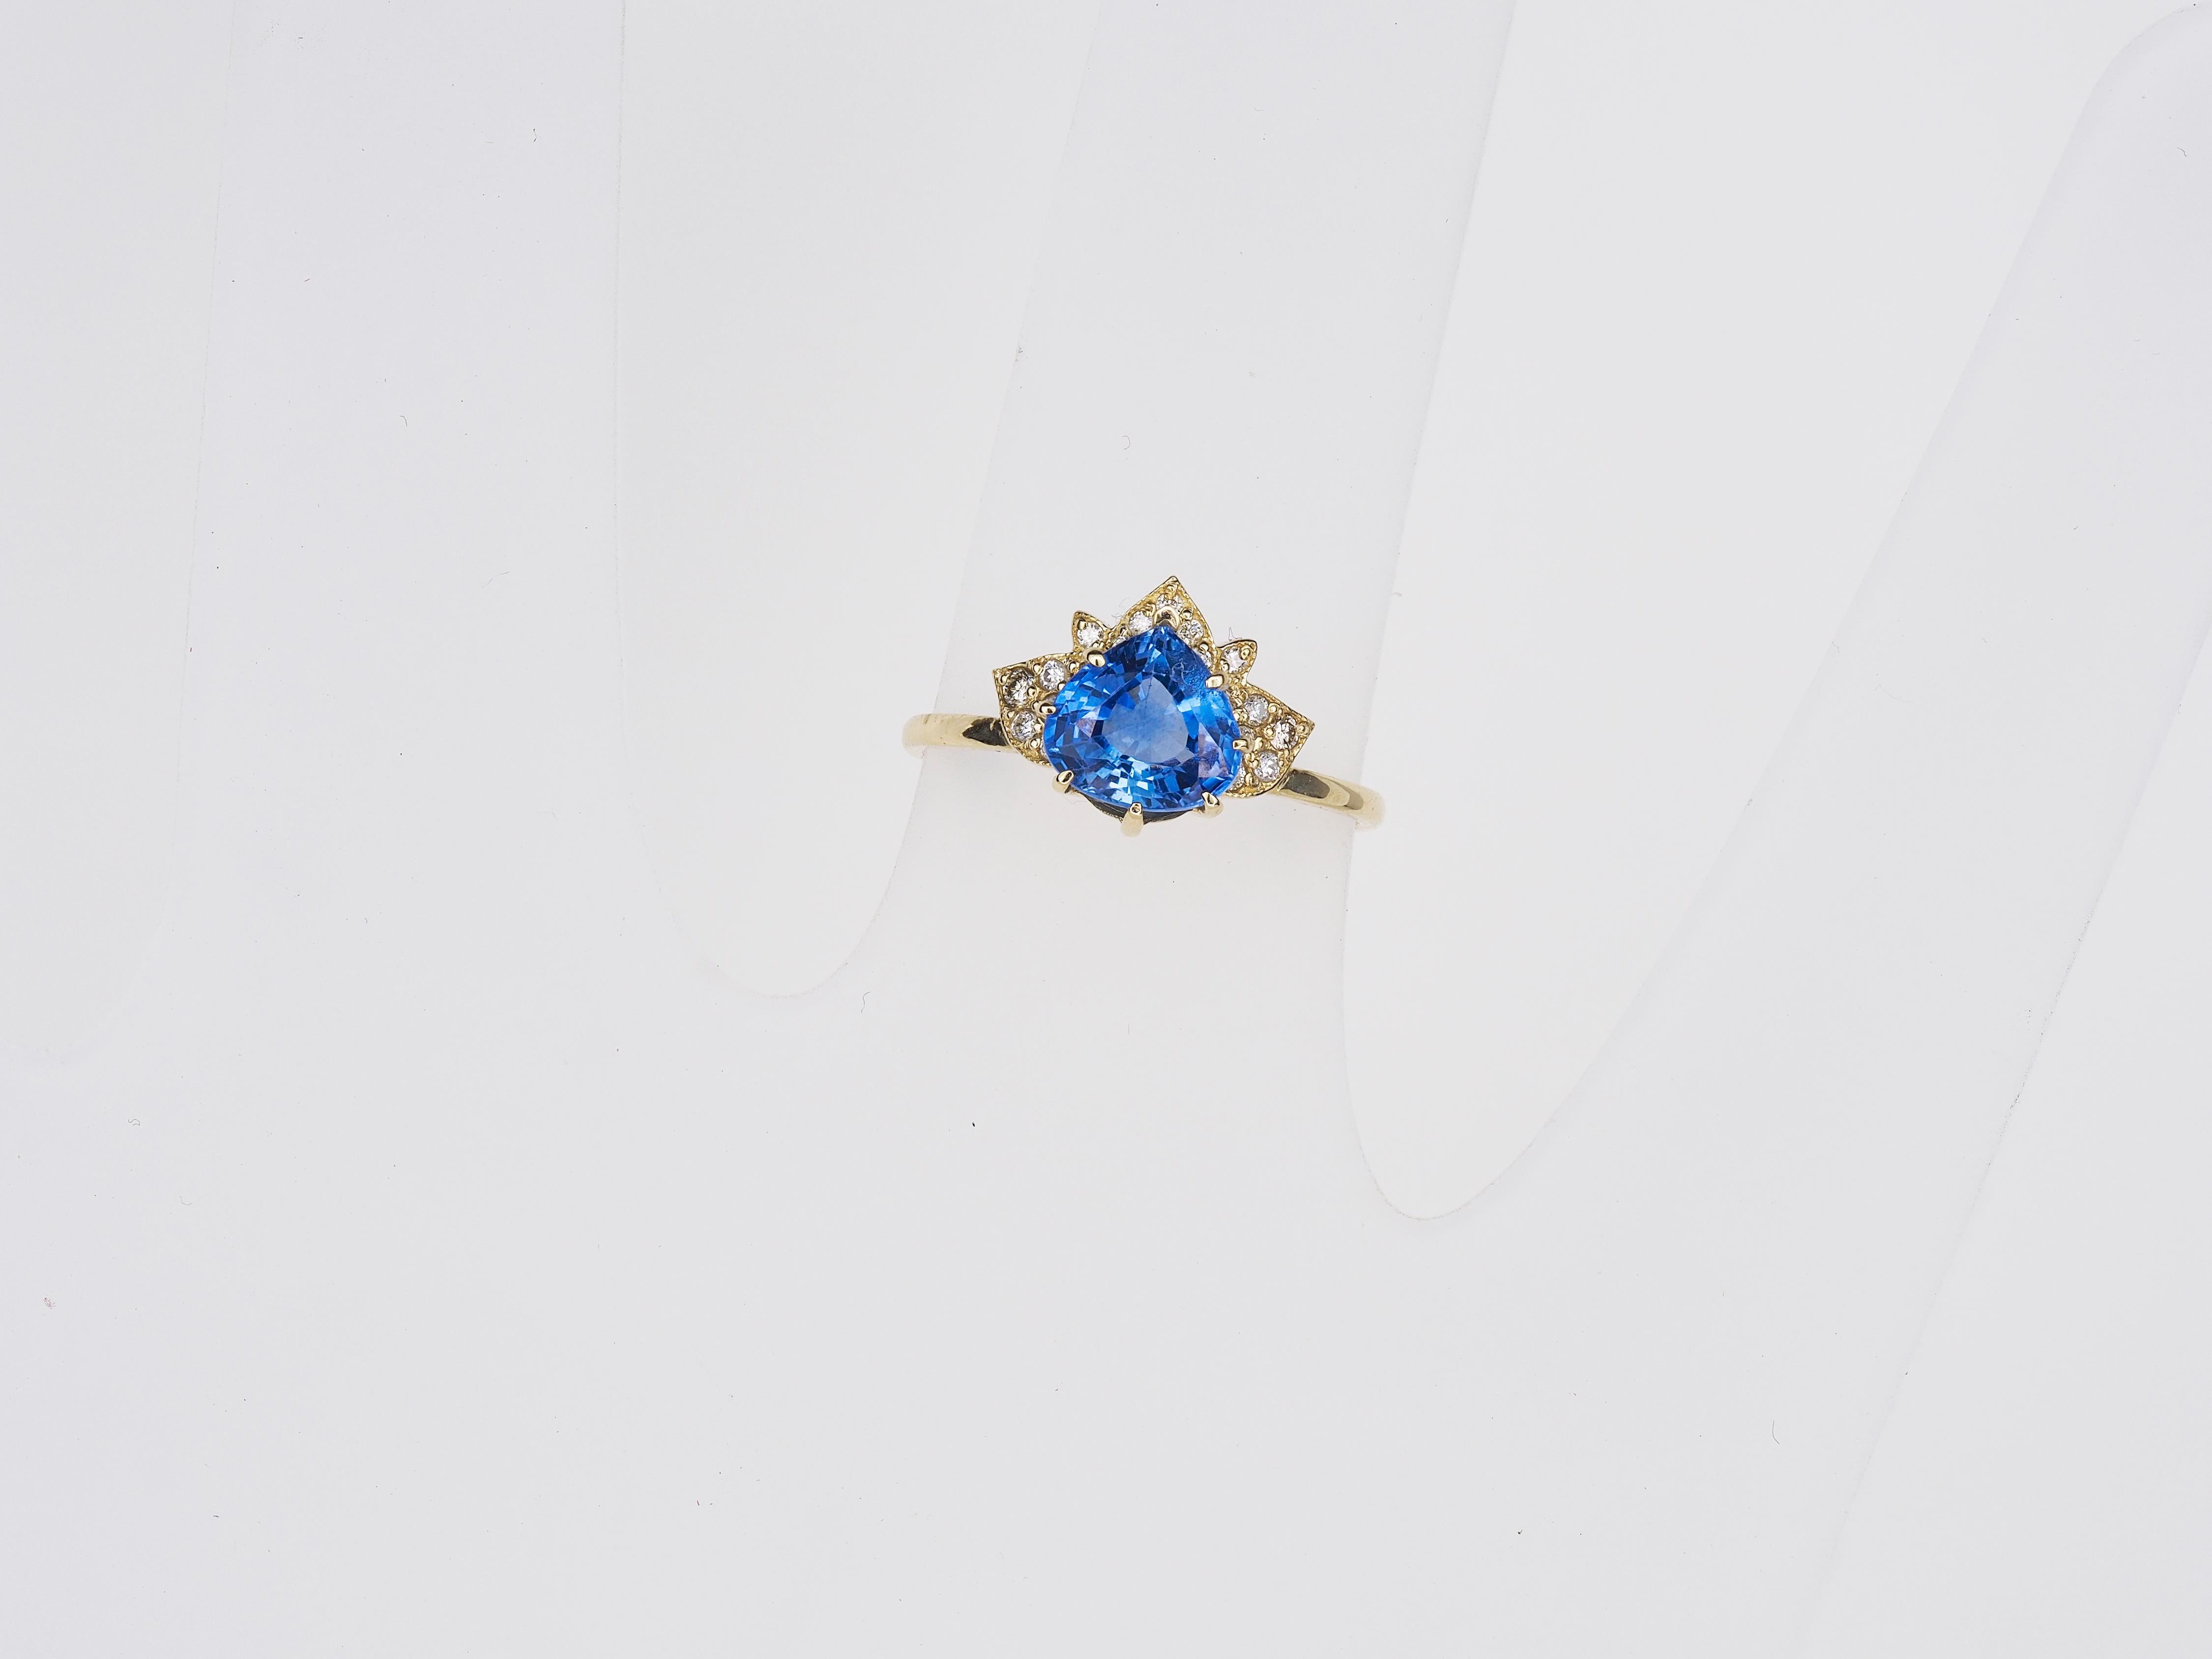 Pear Sapphire Ring, Lotus Ring with Sapphire, Certified Shri Lanka Sapphire Ring 1